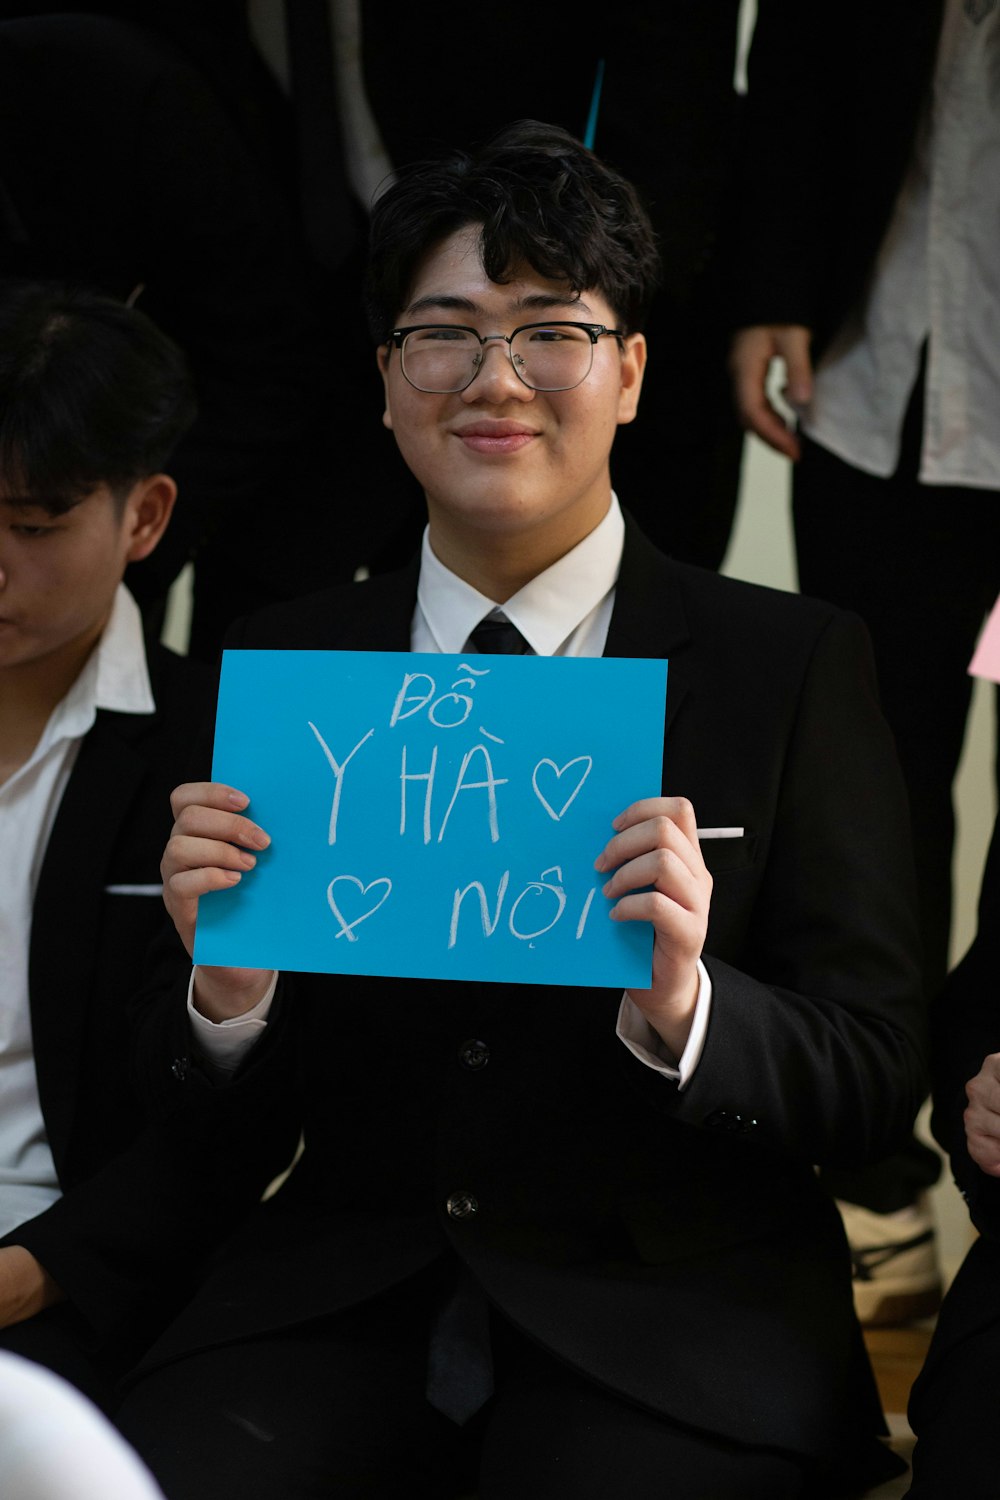 a man in a suit holding a sign that says yes ya ya not